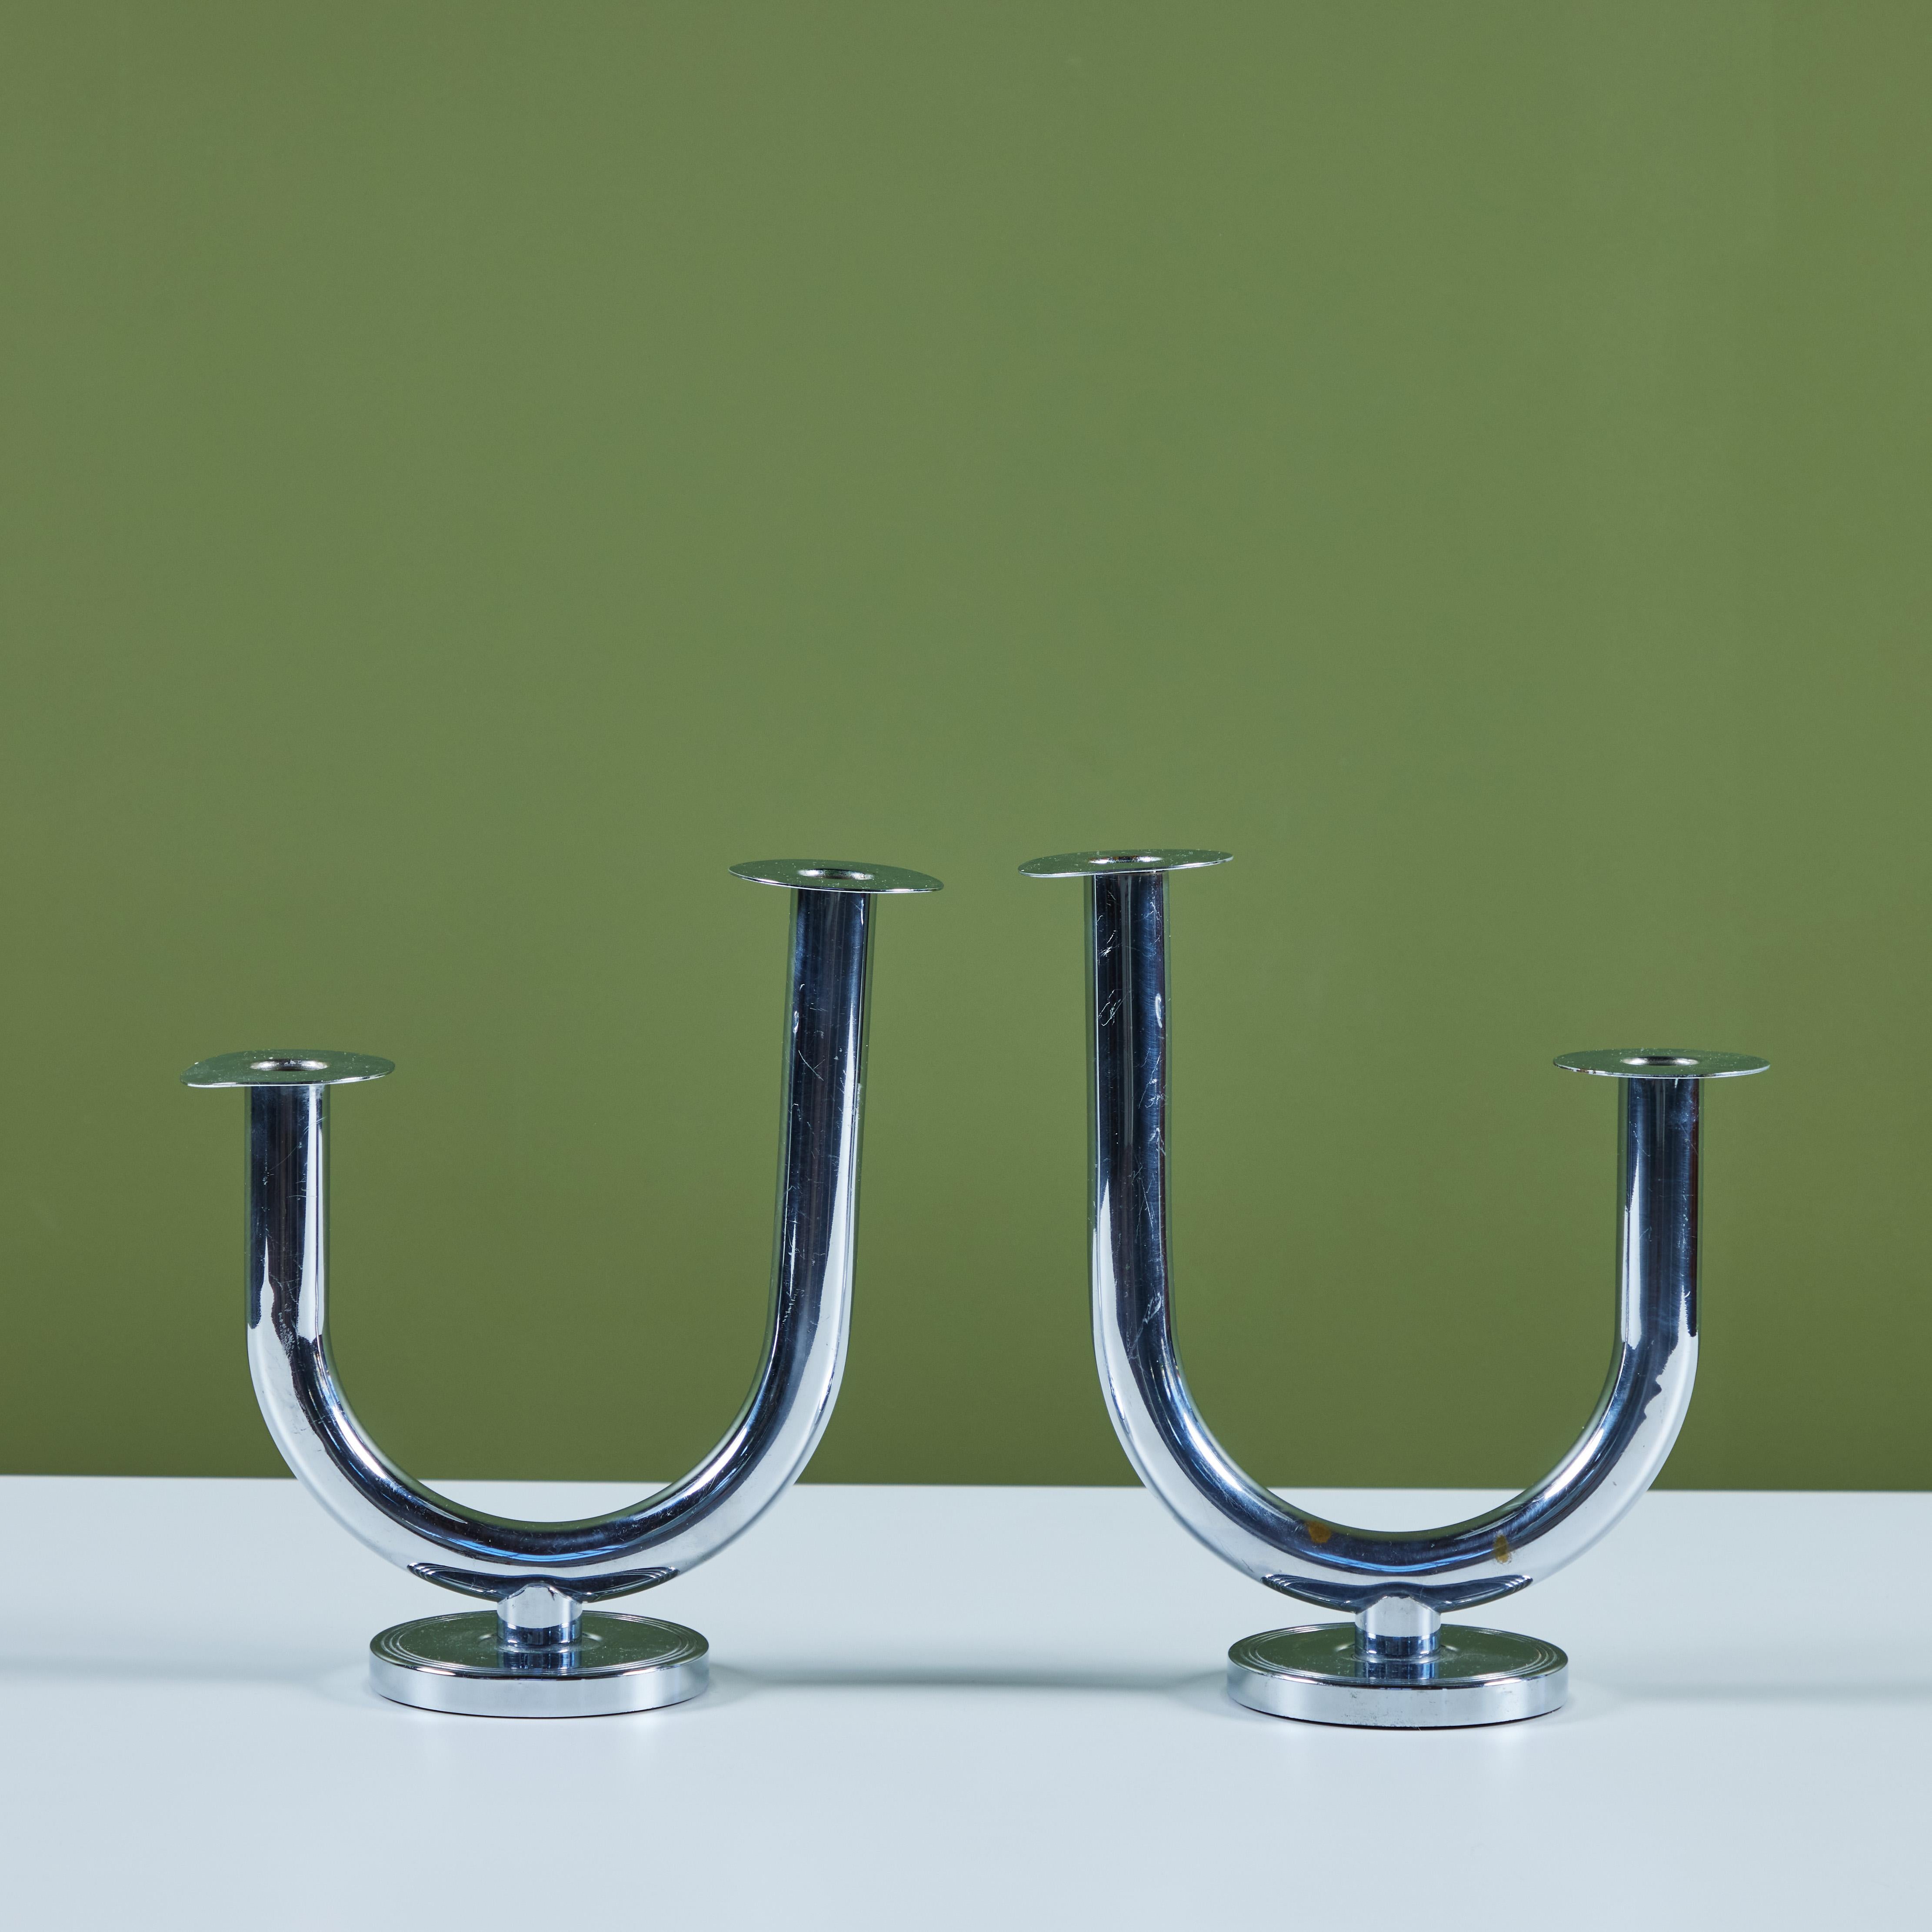 Mid-20th Century Pair of Chrome 'Taurex' Candlestick Holders by Walter Von Nessen for Chase For Sale